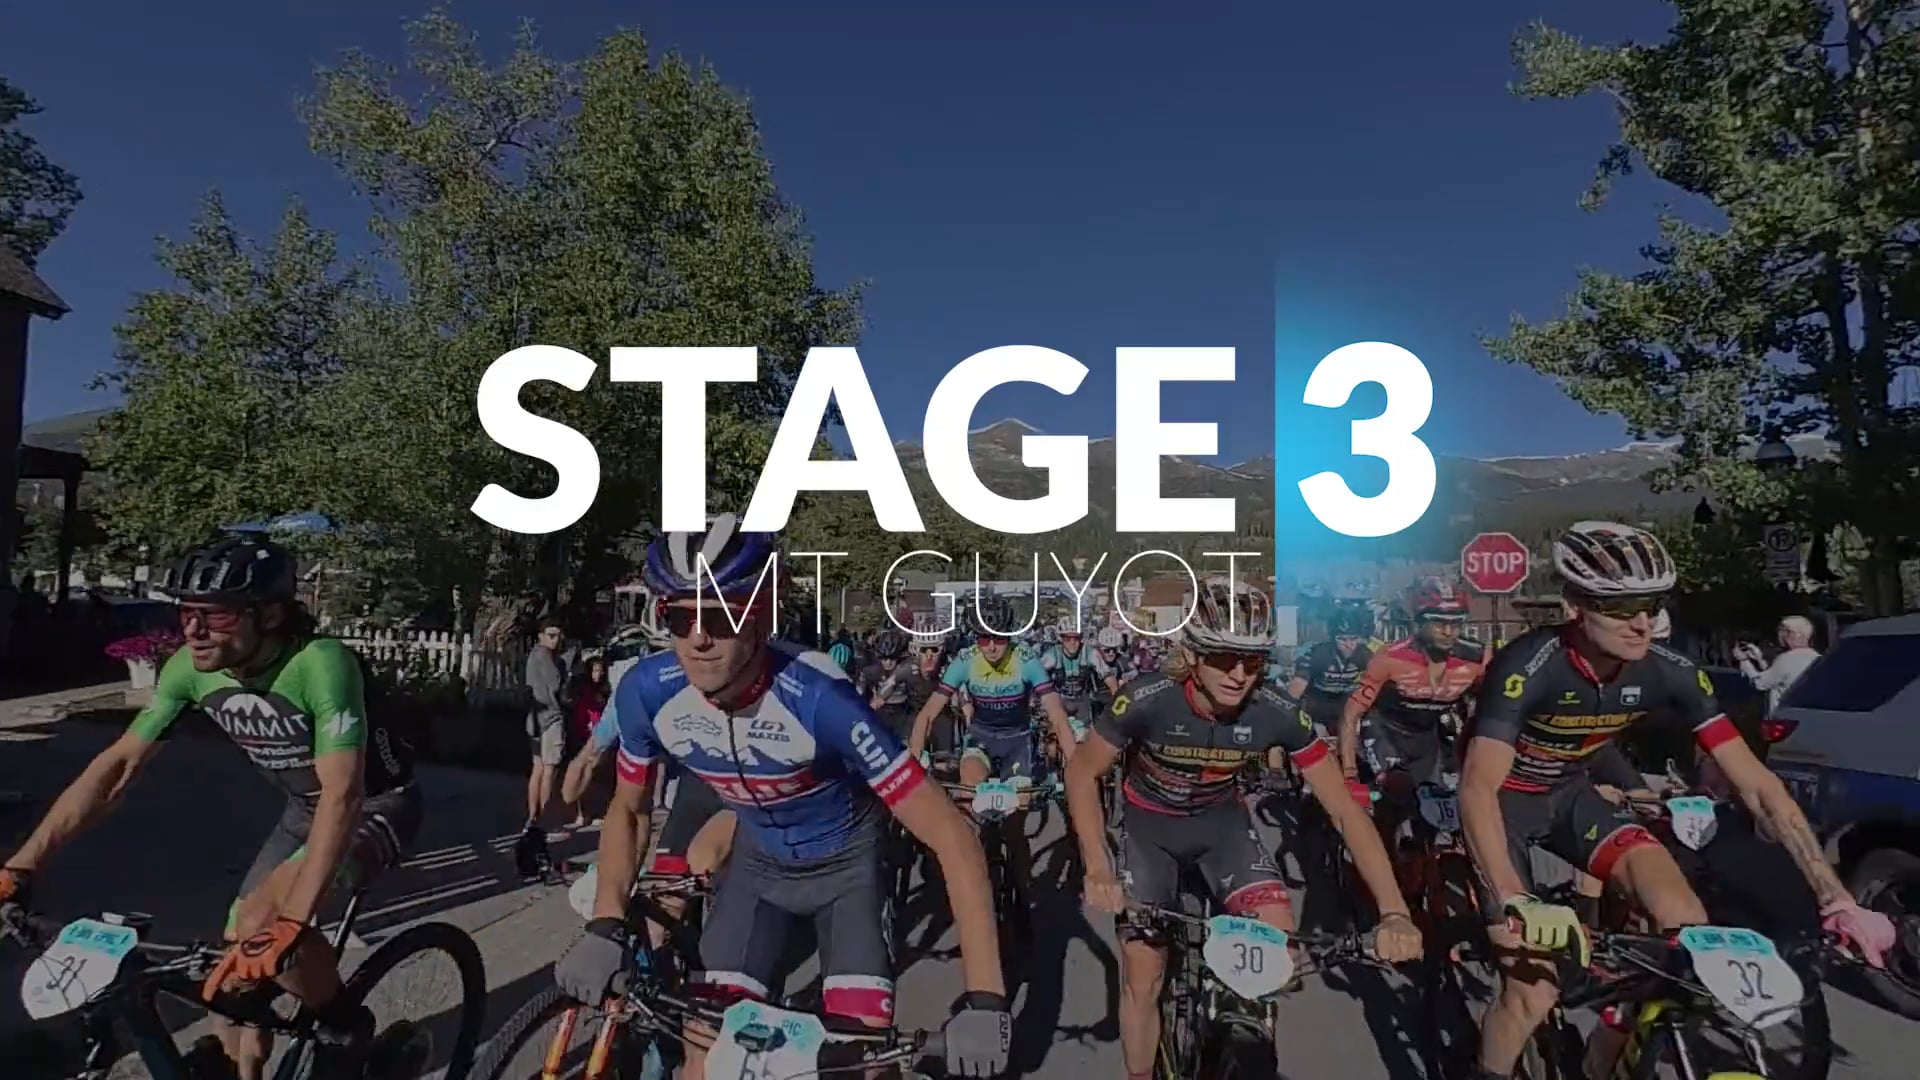 Mt. Guyot Stage 3 Breck Epic 2019